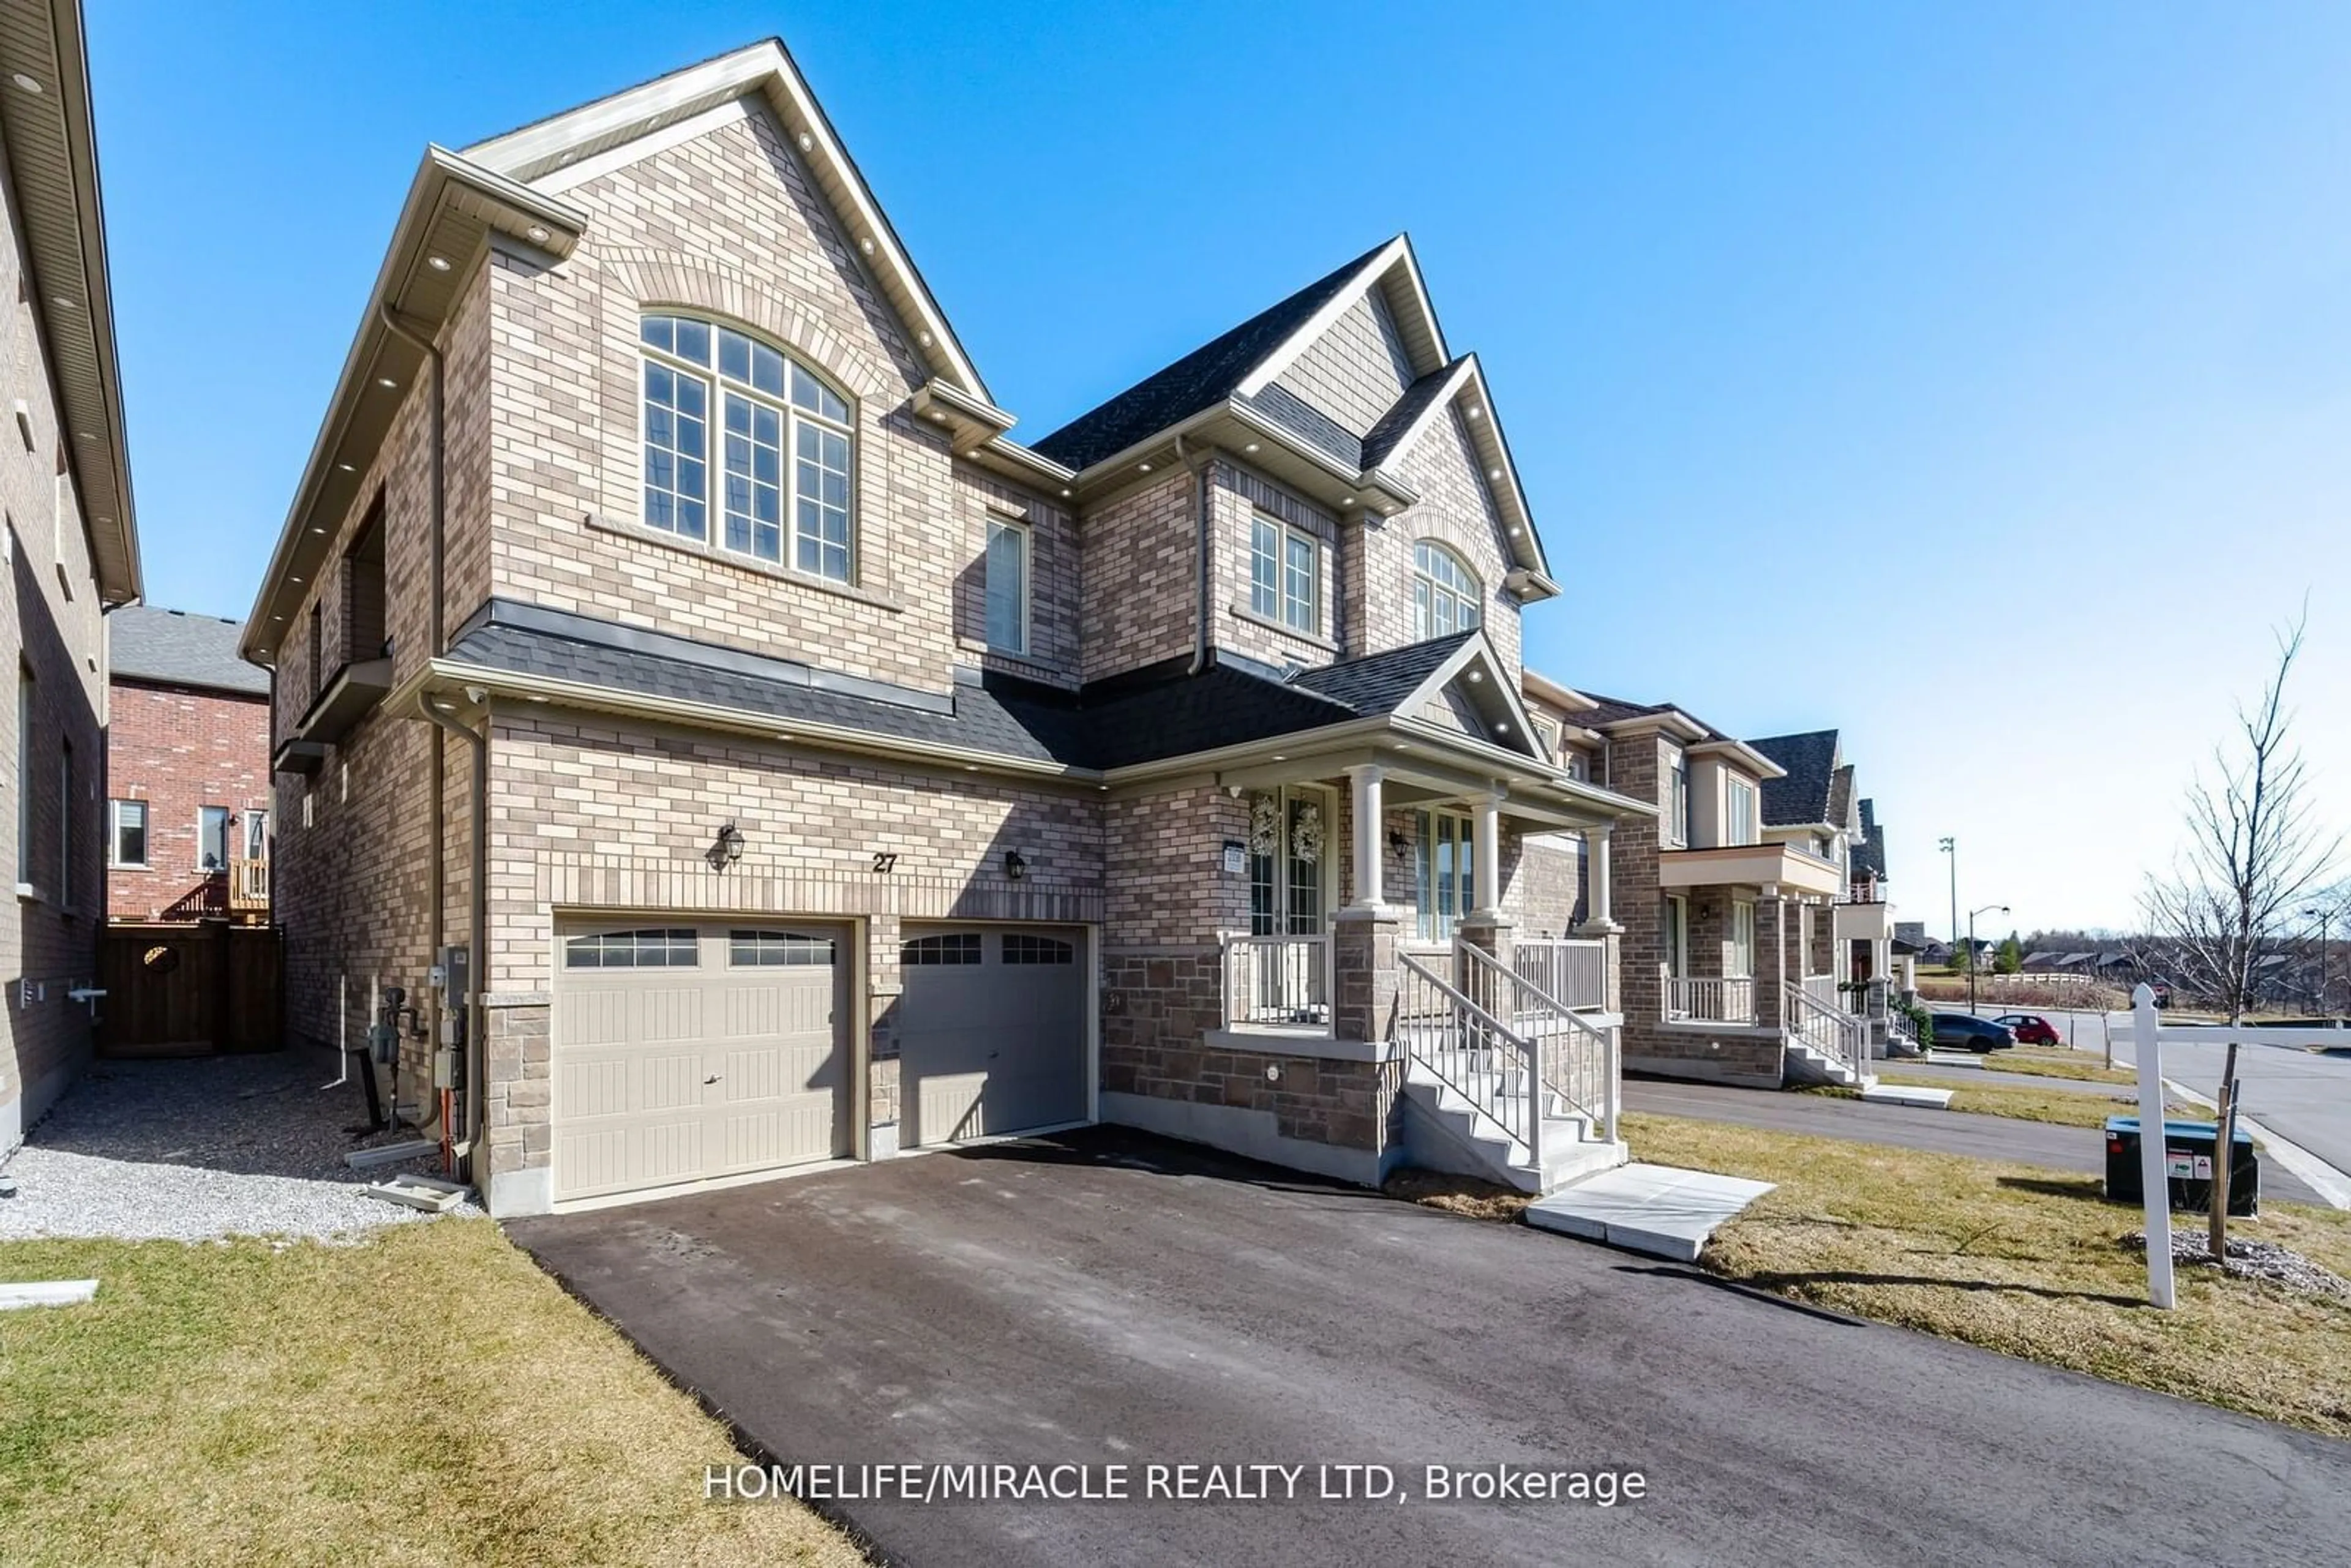 Home with brick exterior material for 27 Balsdon Hllw, East Gwillimbury Ontario L9N 0Y7